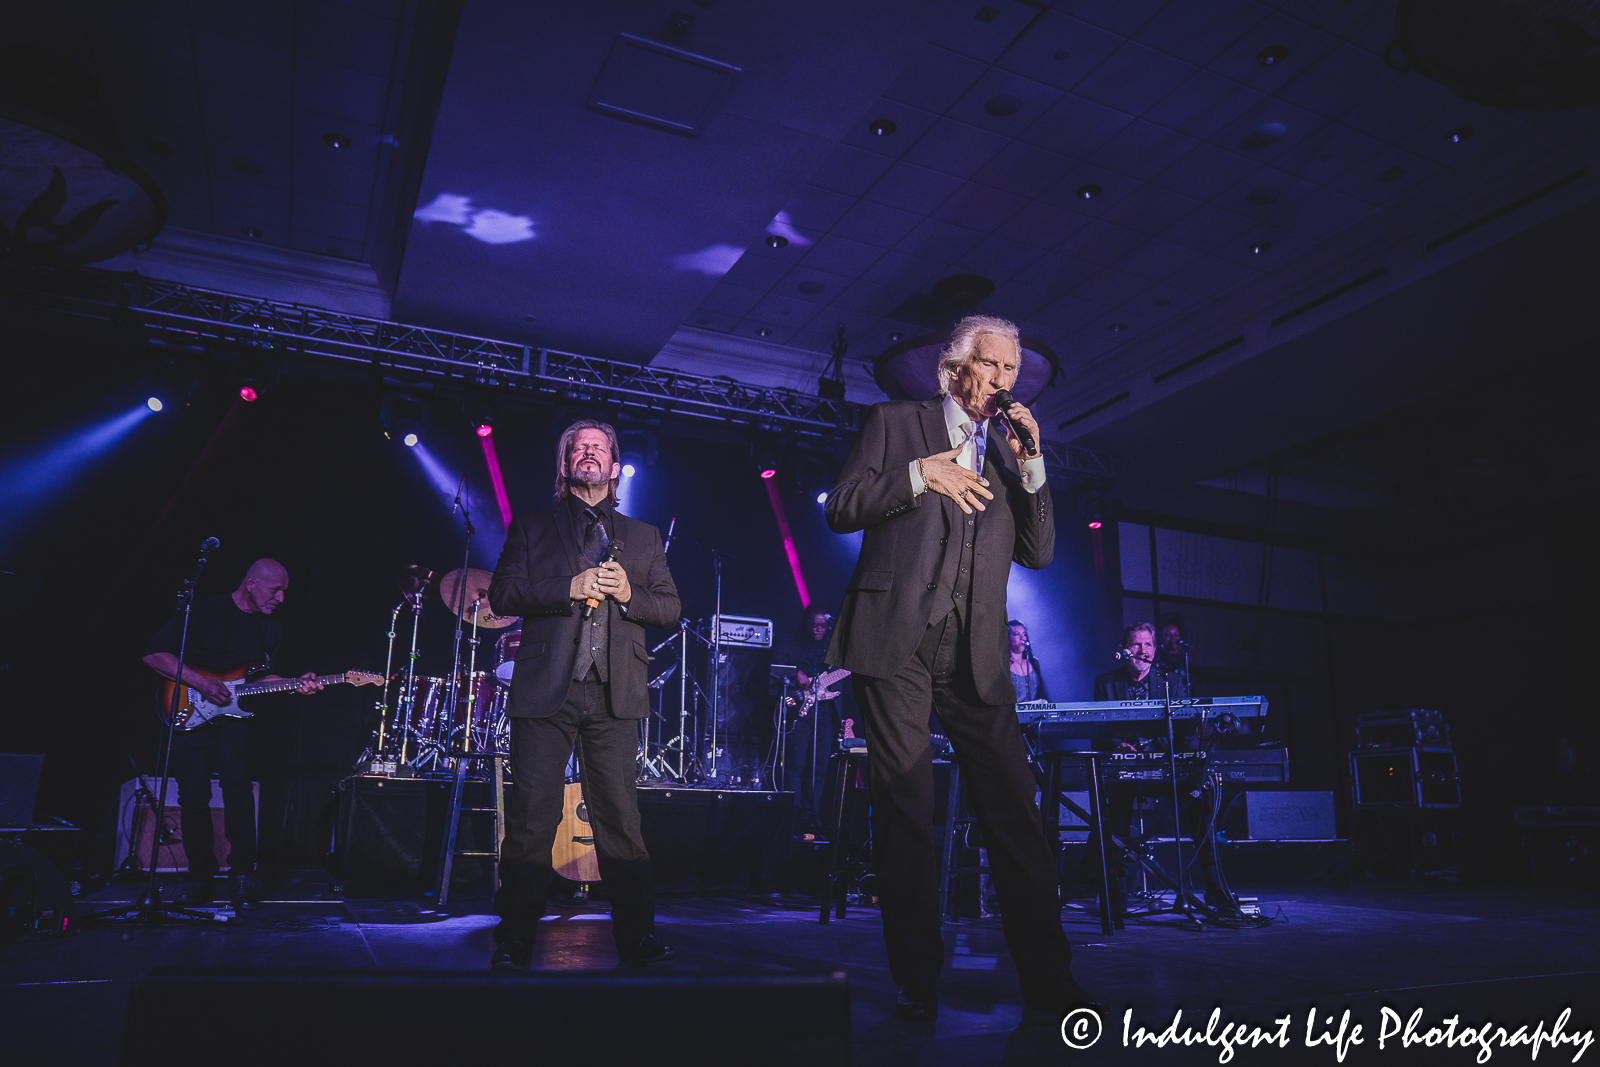 Bill Medley singing live during his Righteous Brothers show at Prairie Band Casino in Mayetta, KS on June 29, 2023.